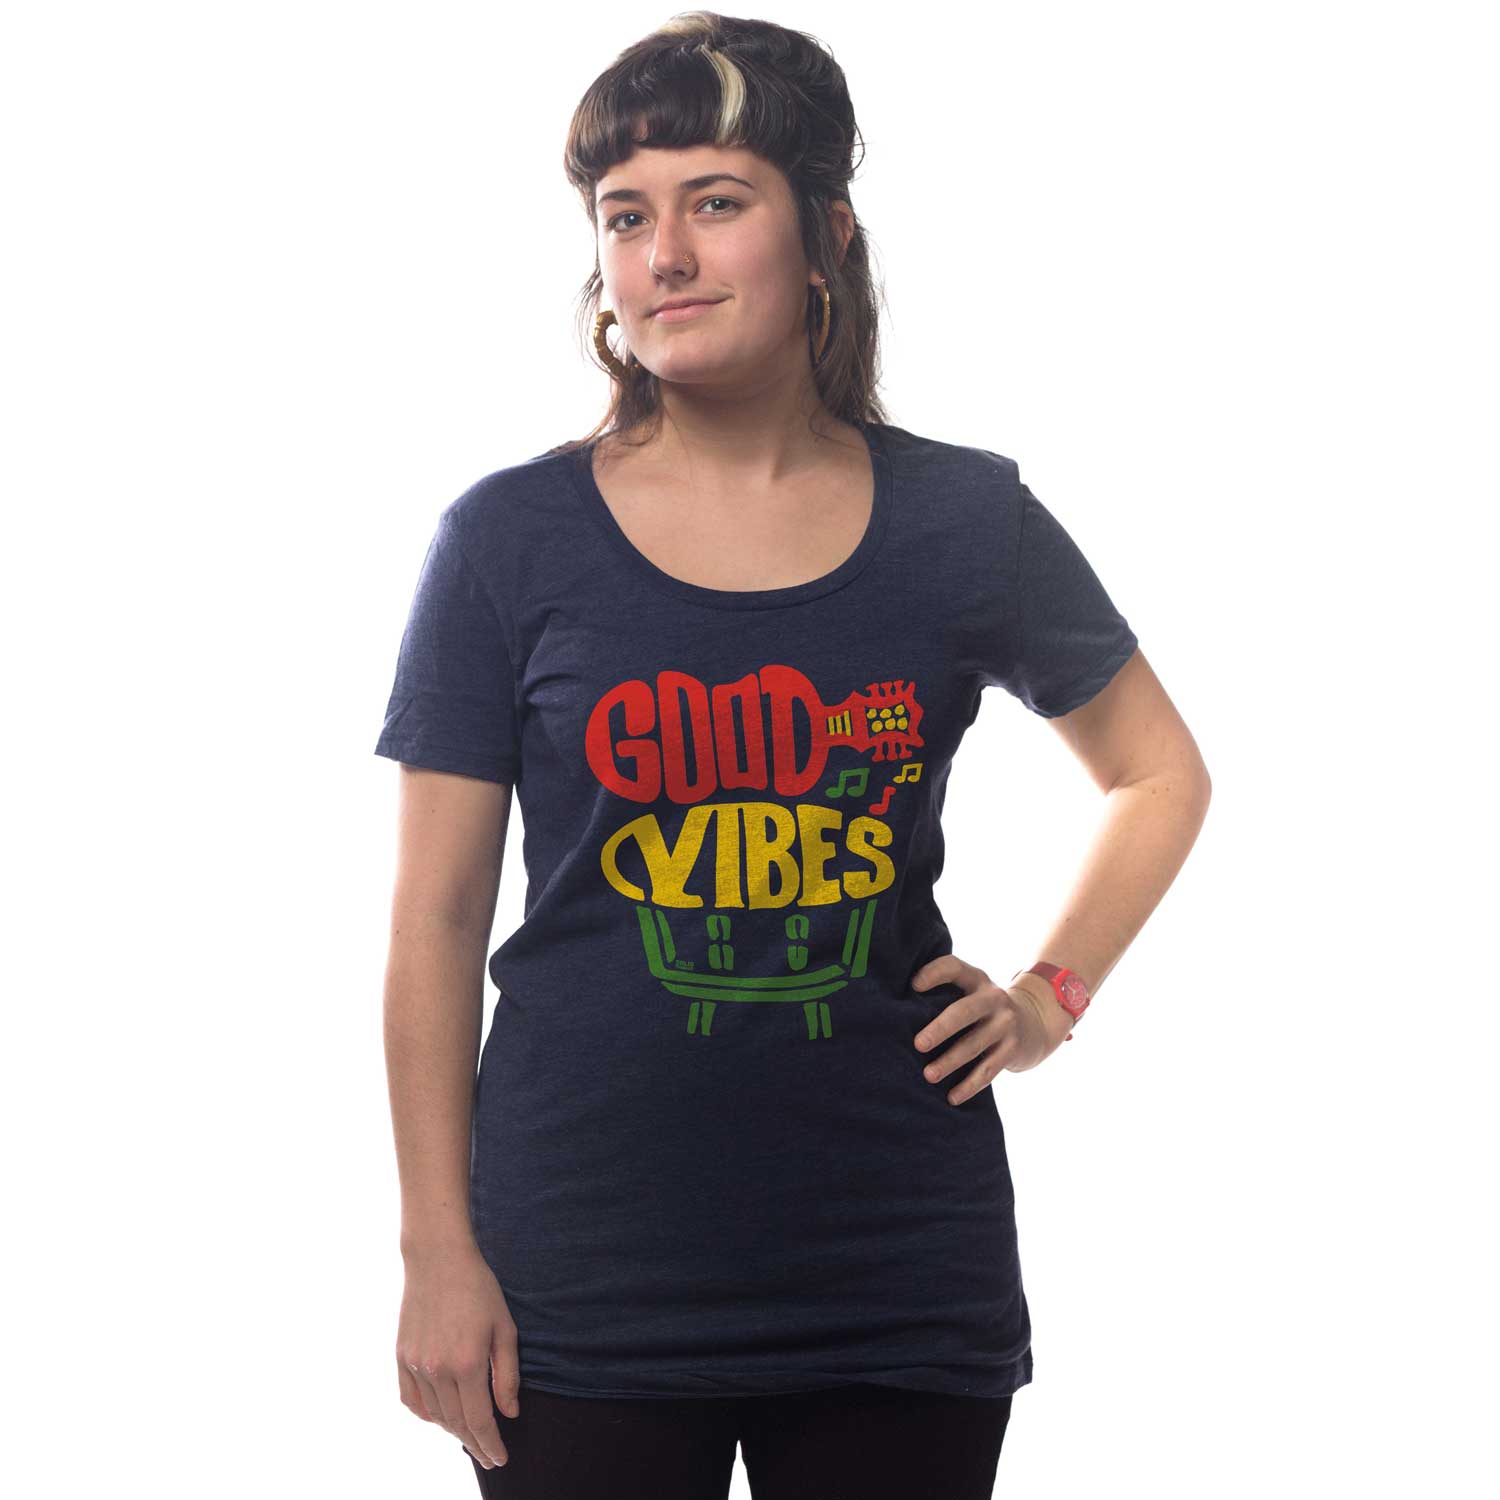 Women's Good Vibes Vintage Graphic Tee | Retro Music T-shirt on Model | Solid Threads